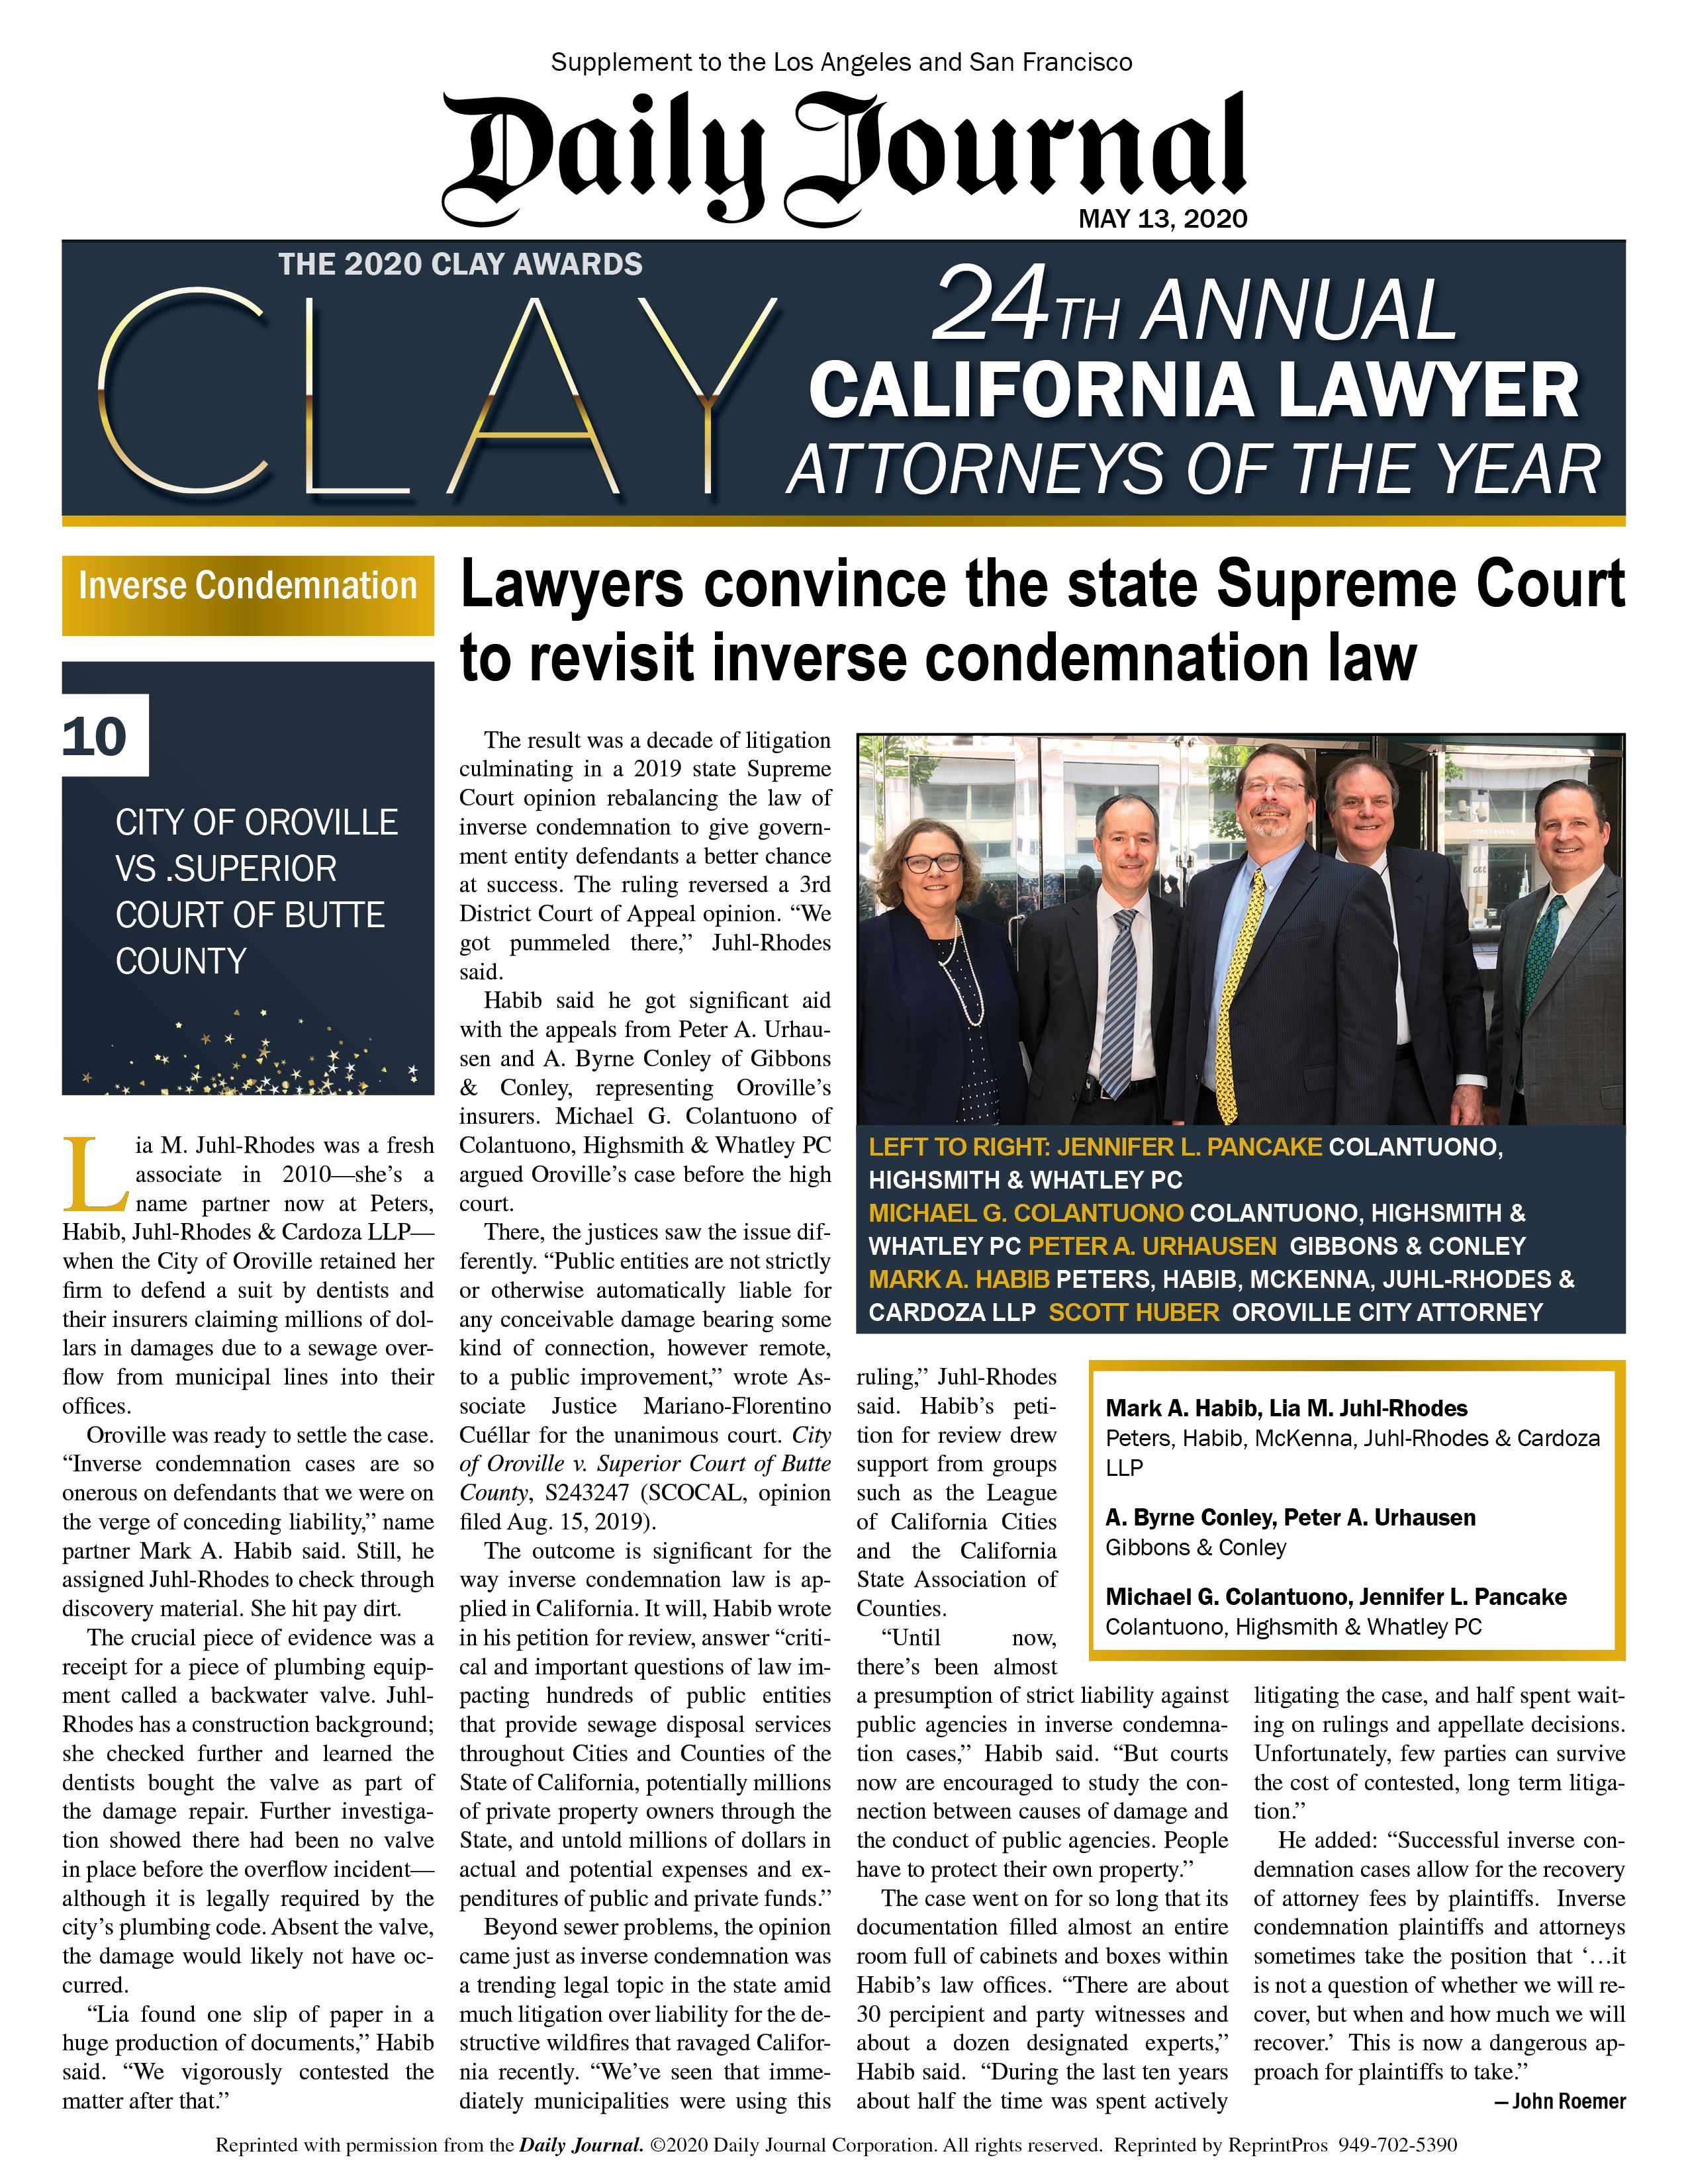 24th Annual California Lawyer Attorneys of the Year